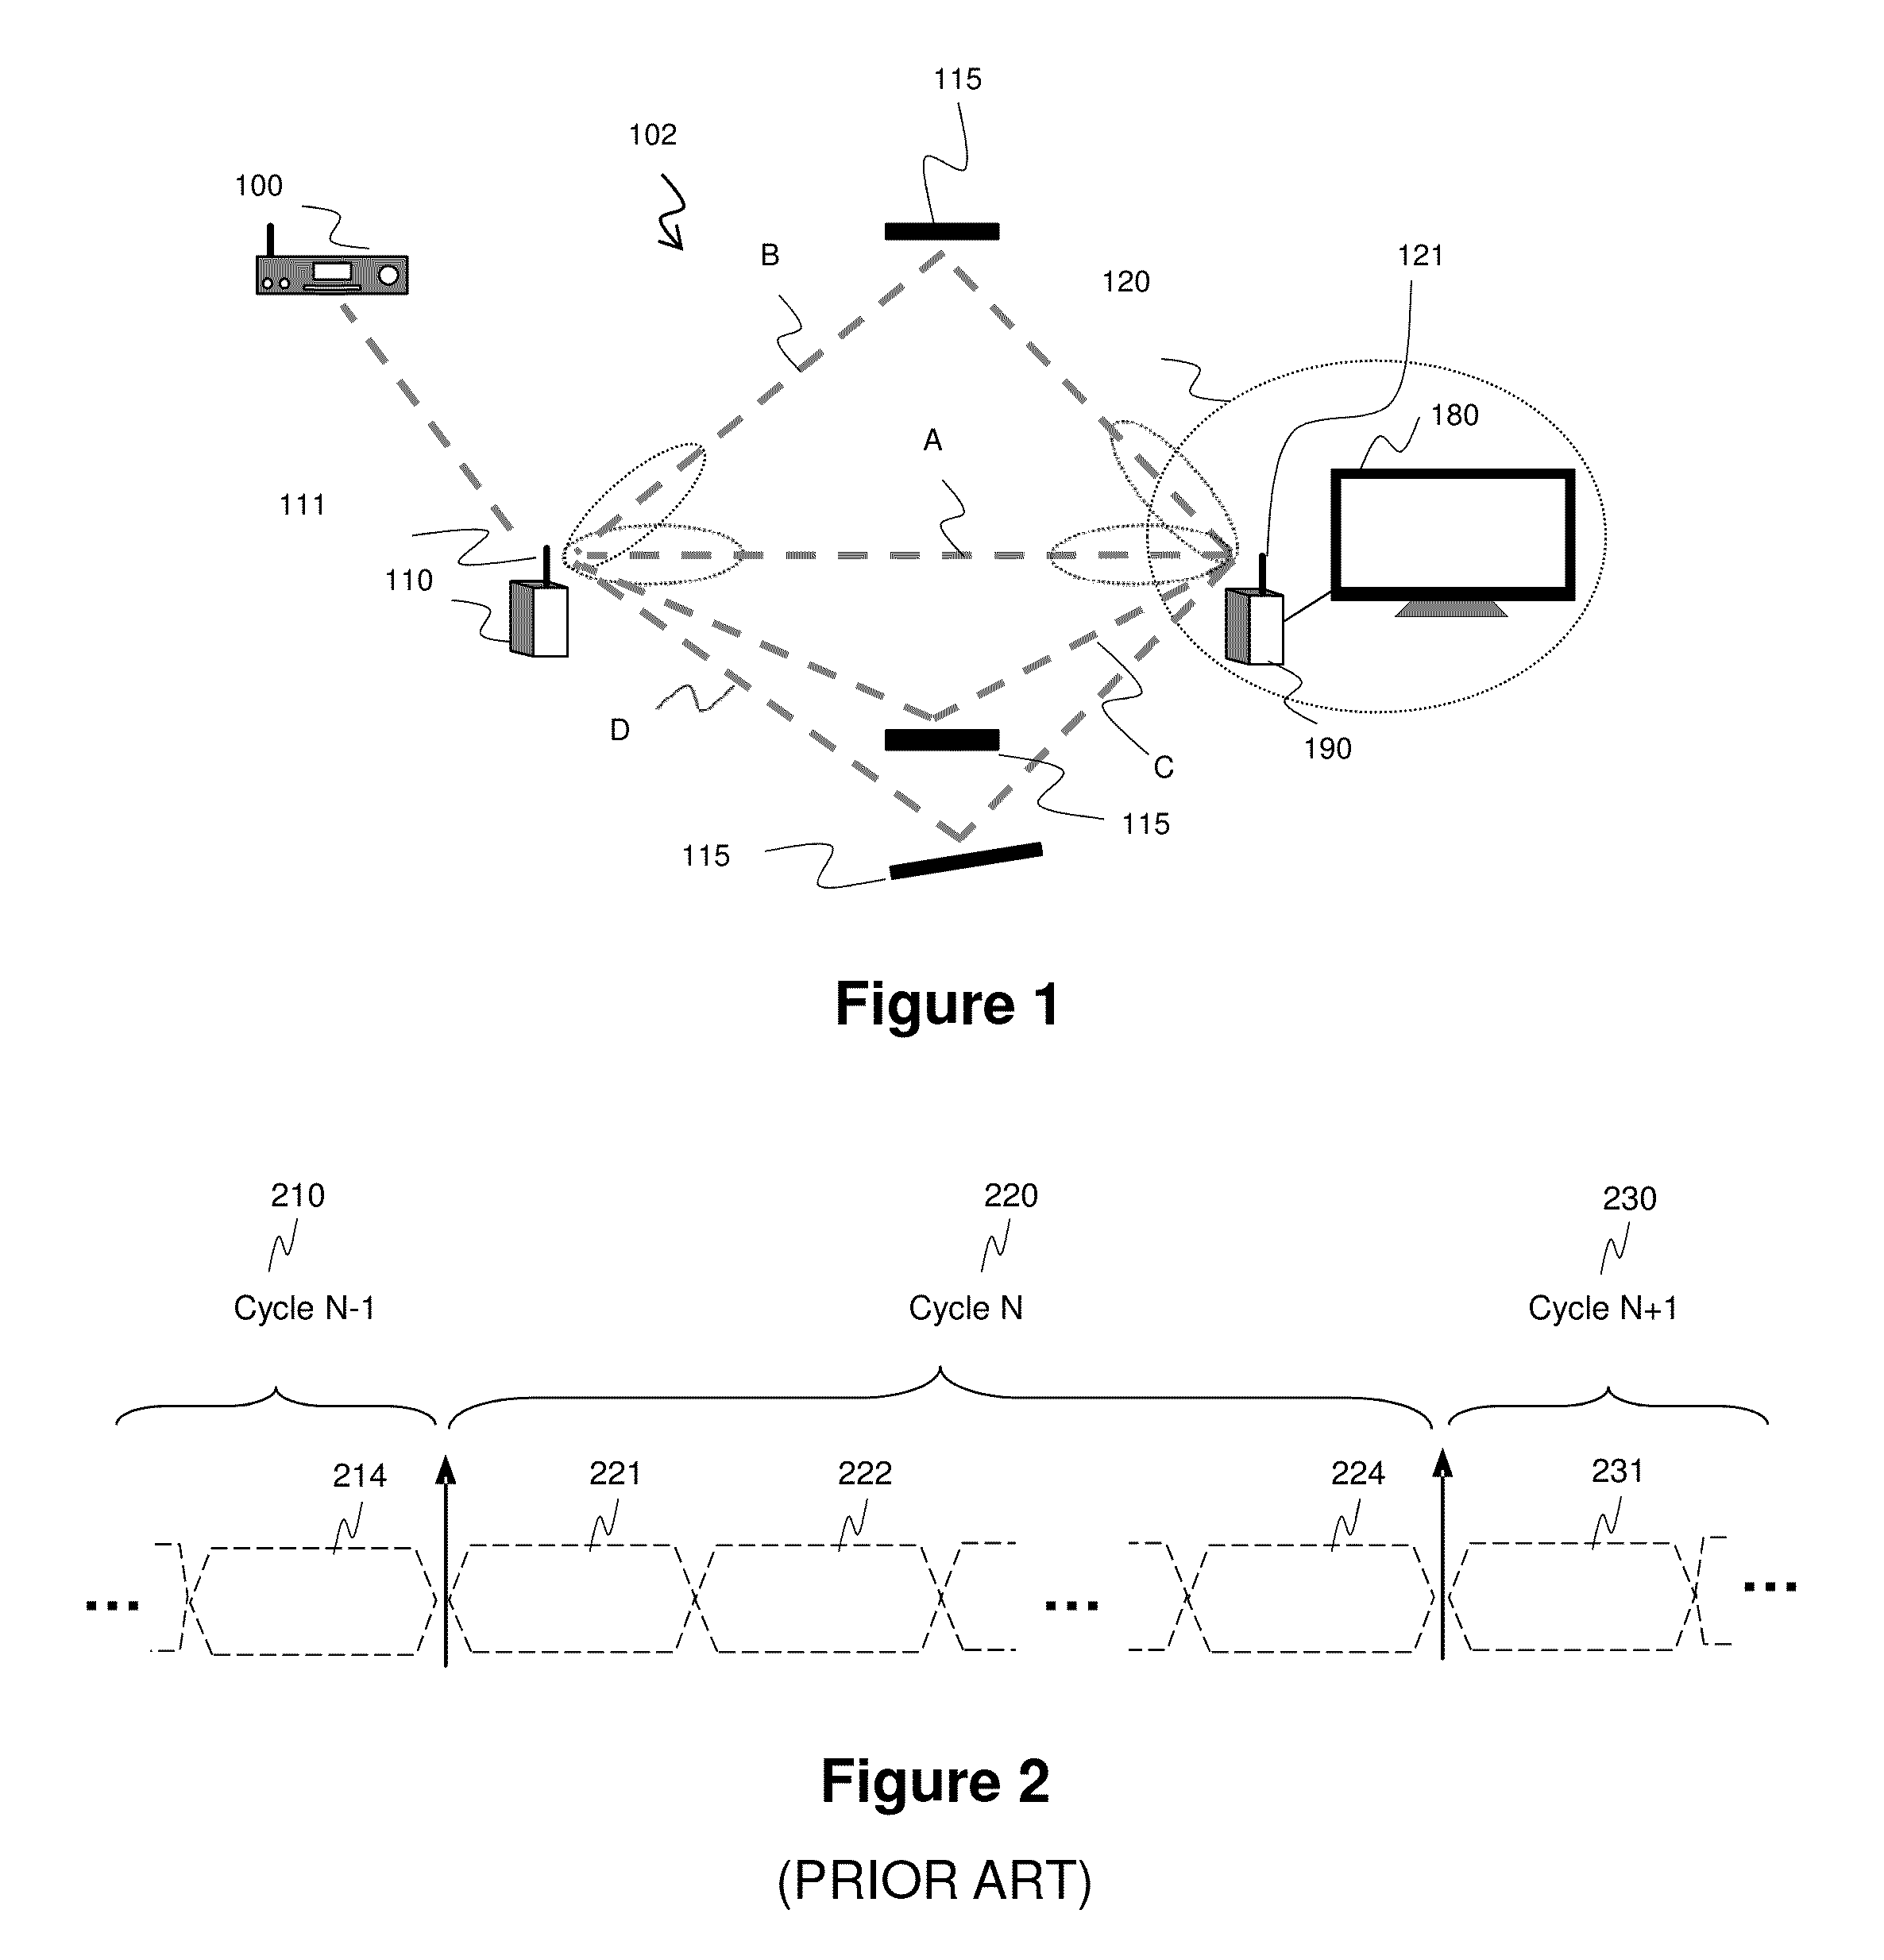 Methods and devices for transmitting and receiving data signals in a wireless network over a plurality of transmission paths